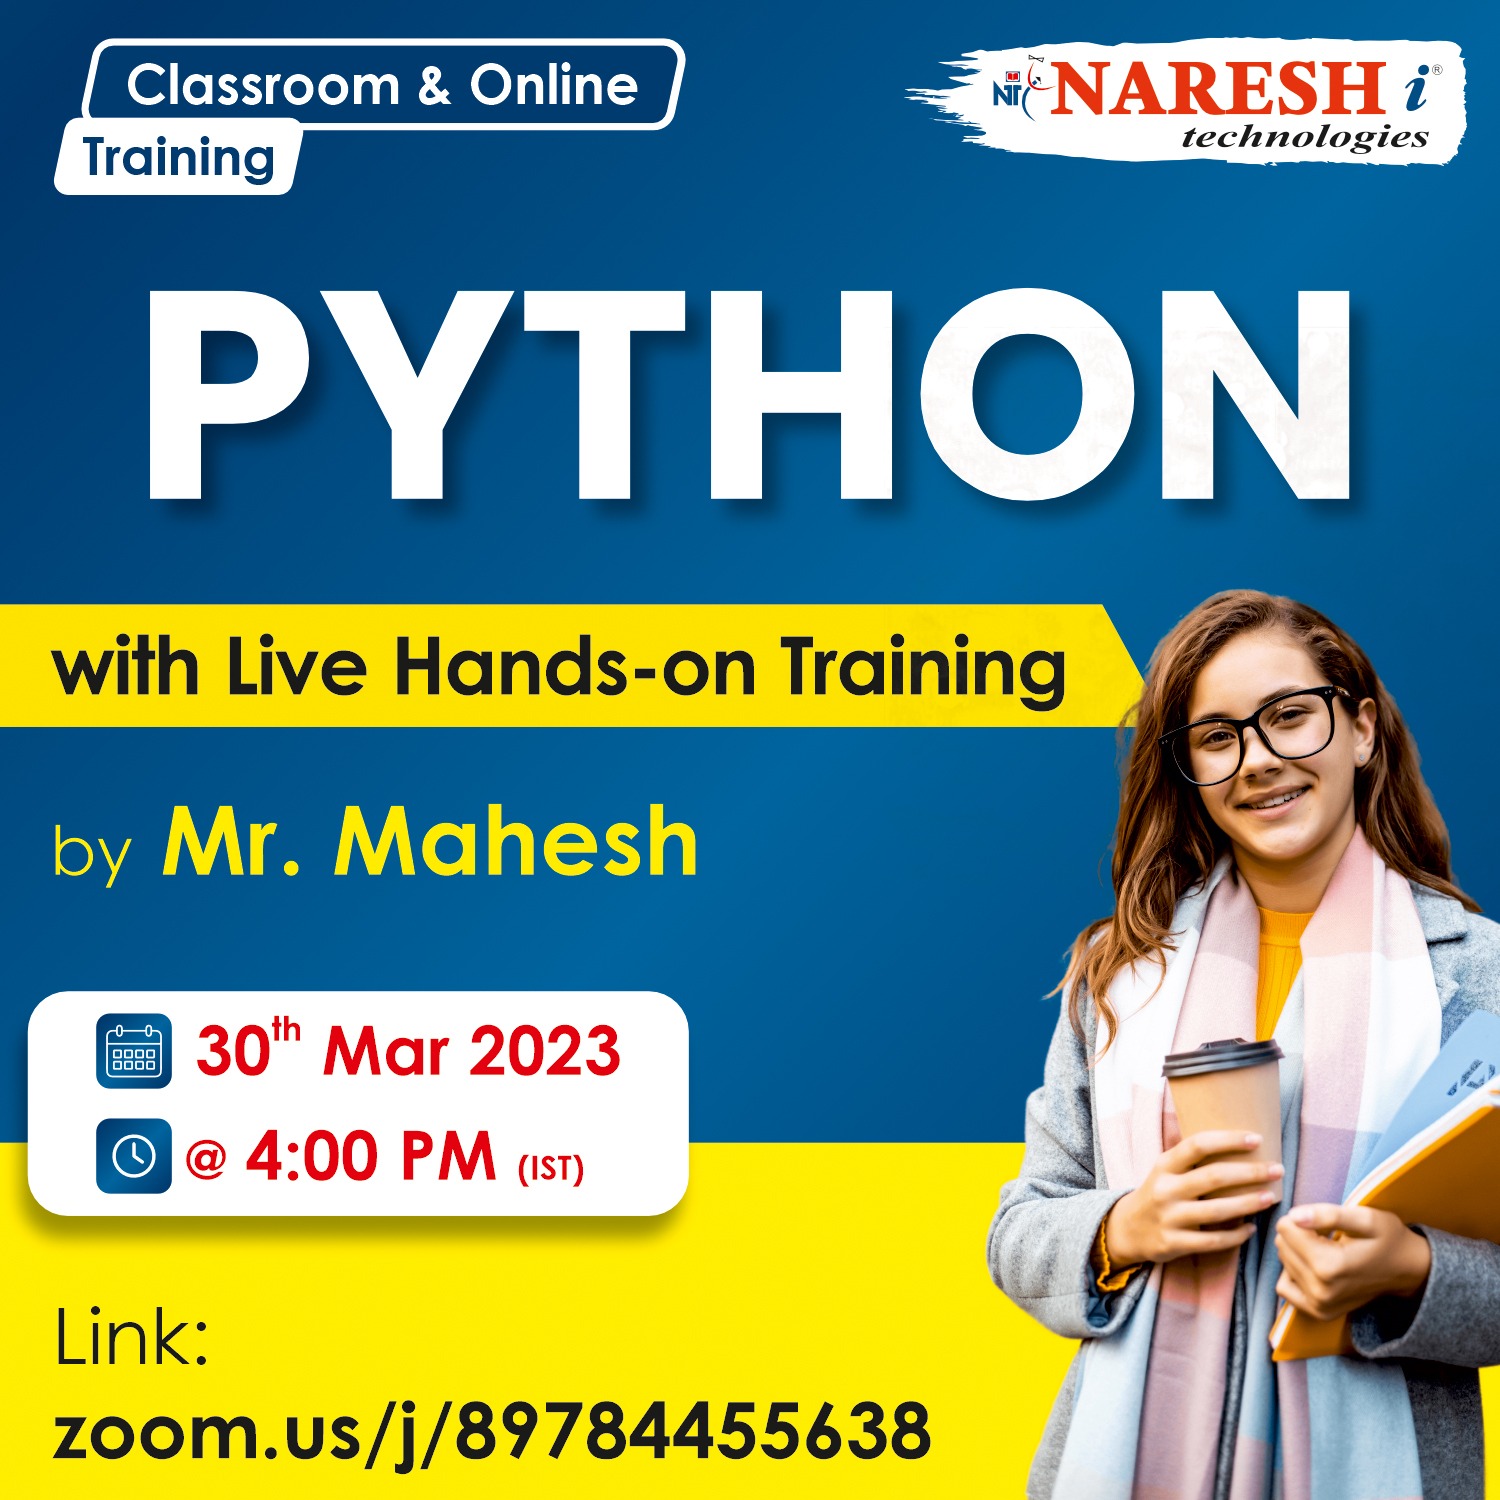 Top python training in india 2023 NareshIT, Online Event